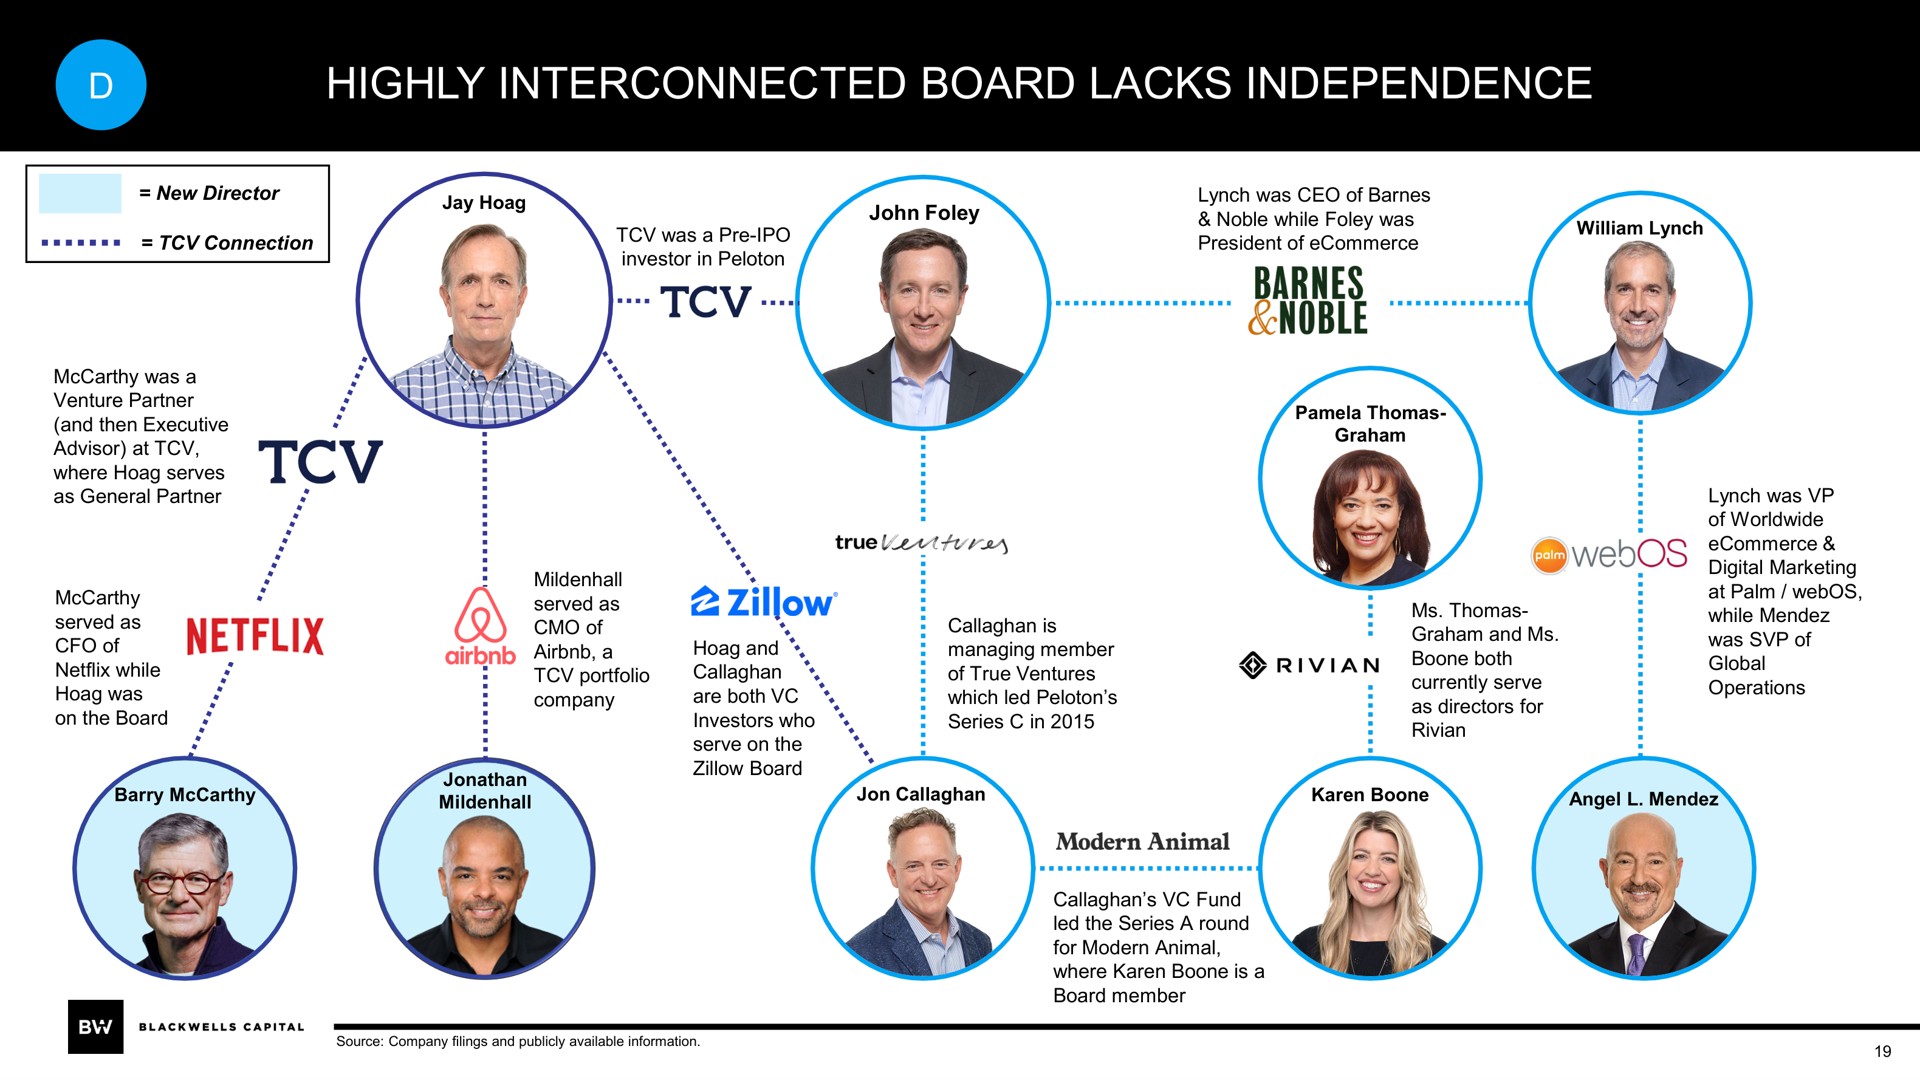 highly interconnected board lacks independence noble | Blackwells Capital